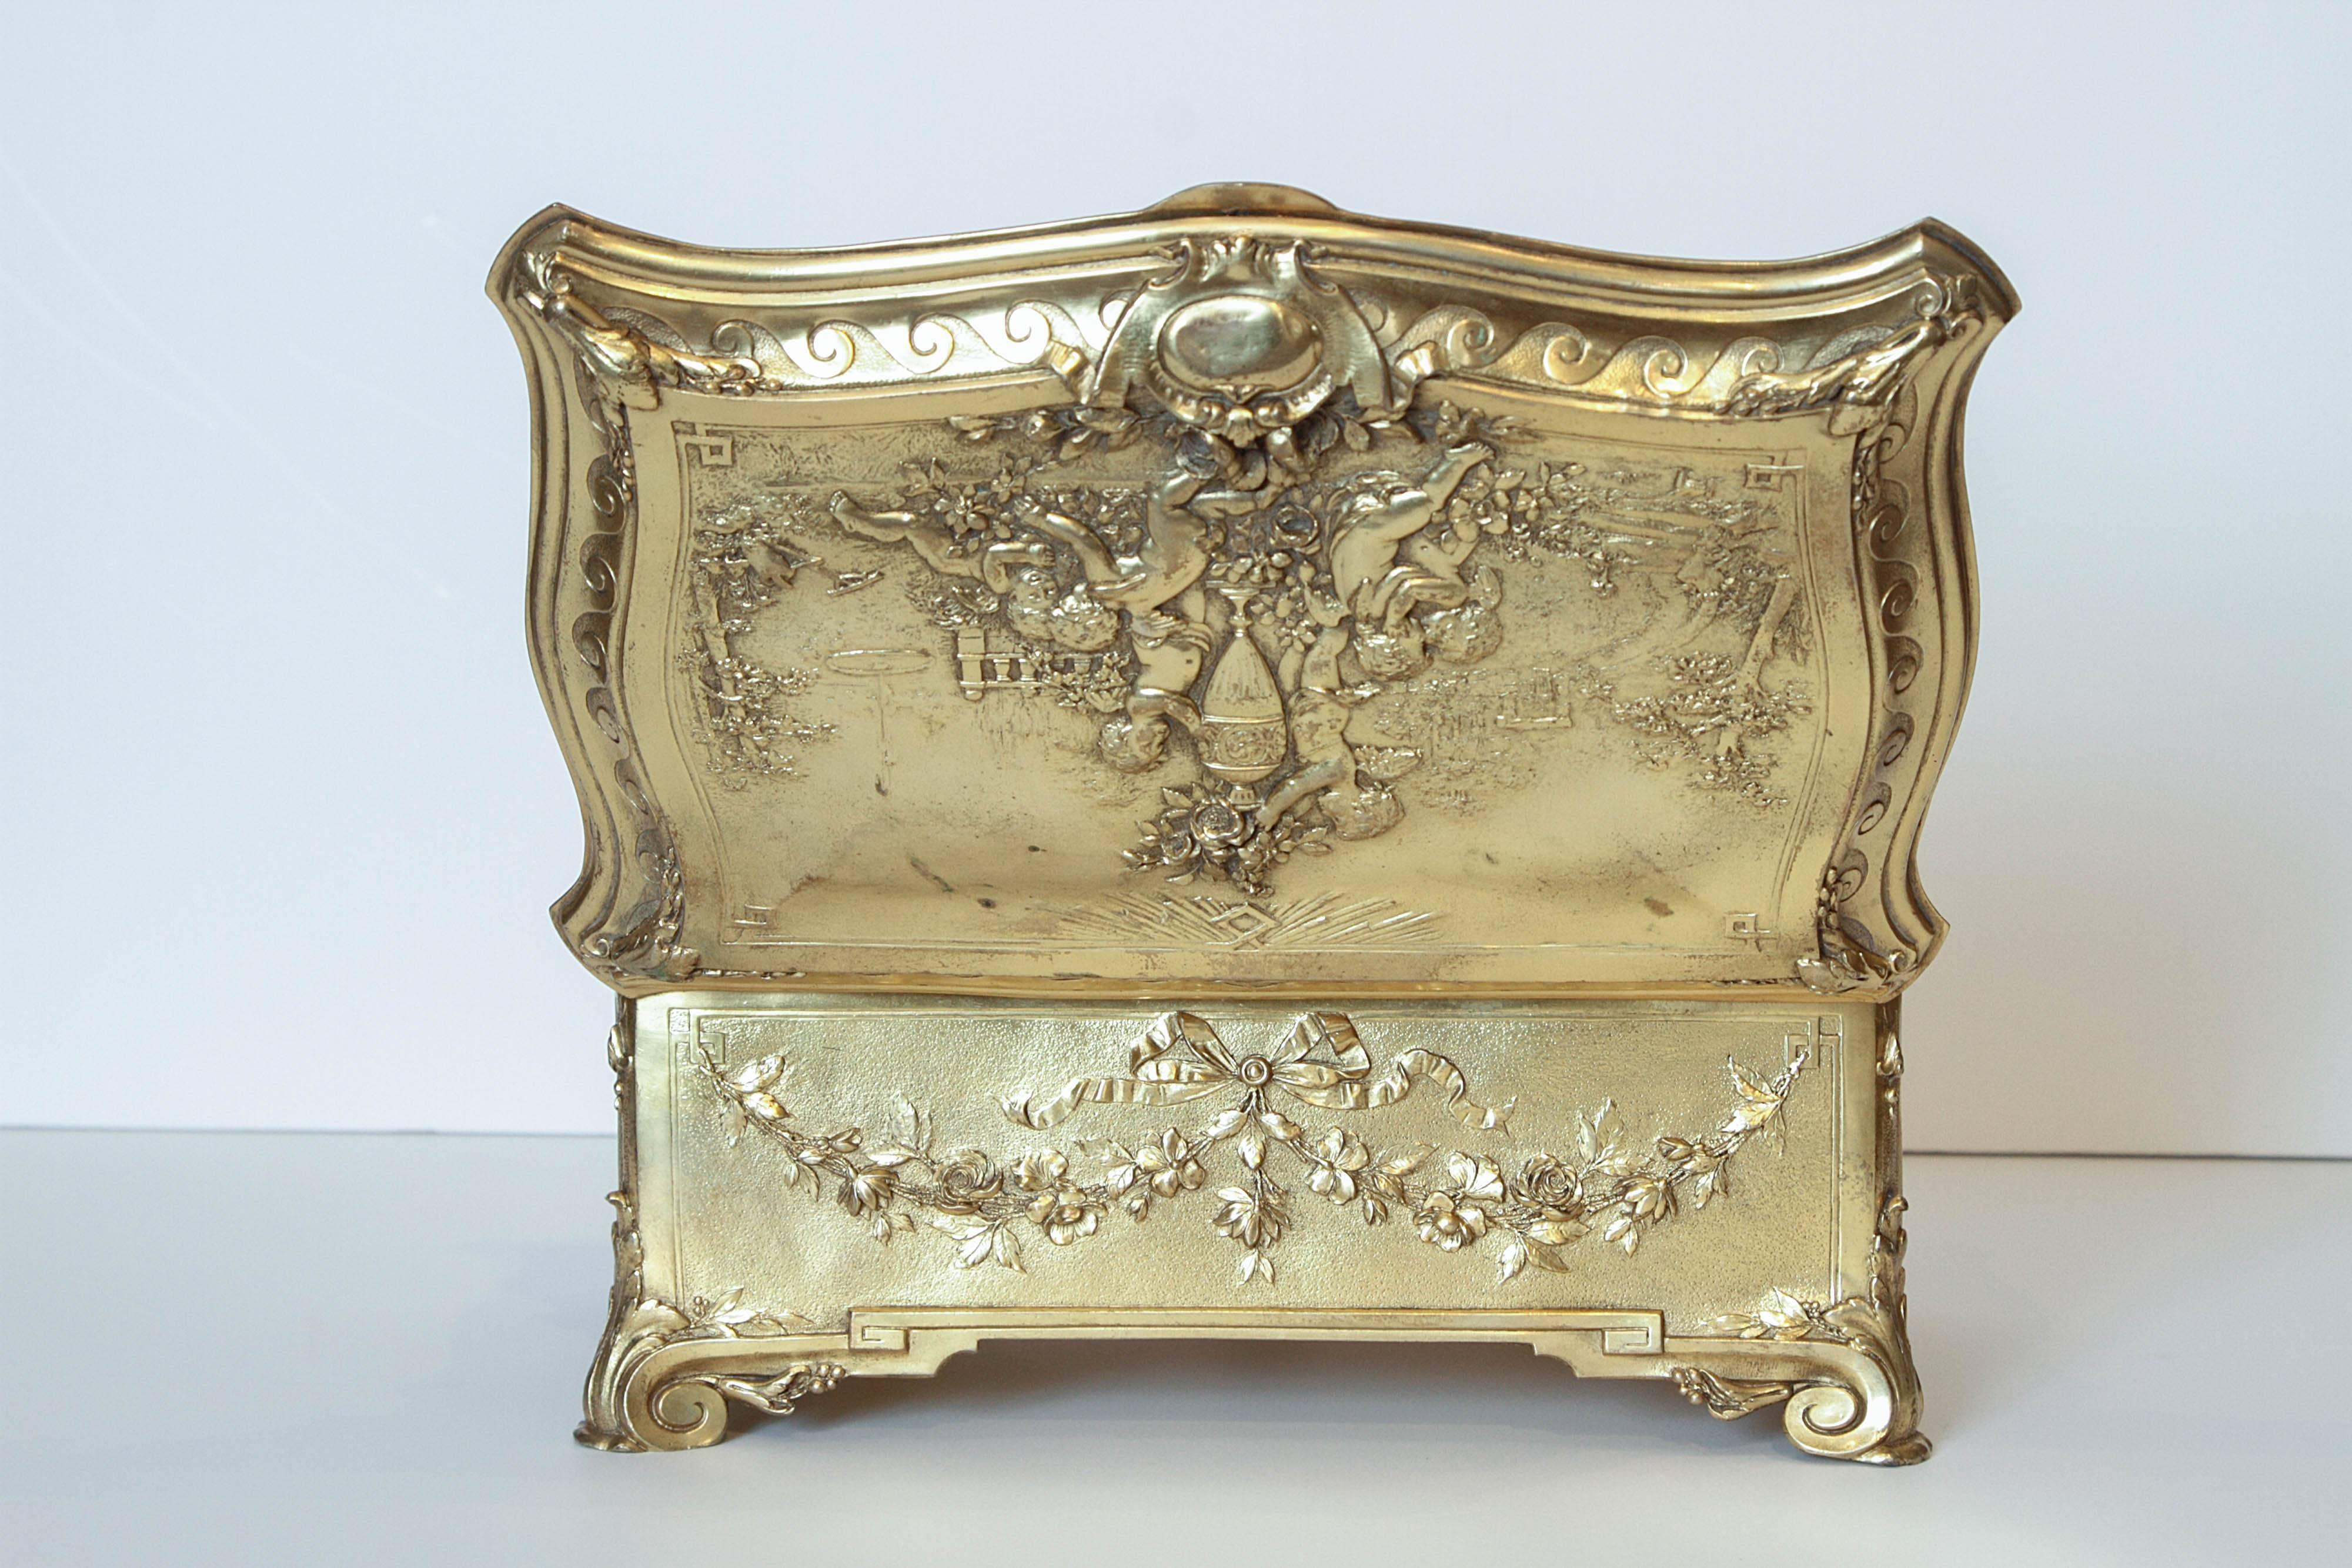 19th Century French Large and Finely Gilt Bronze Casket For Sale 2